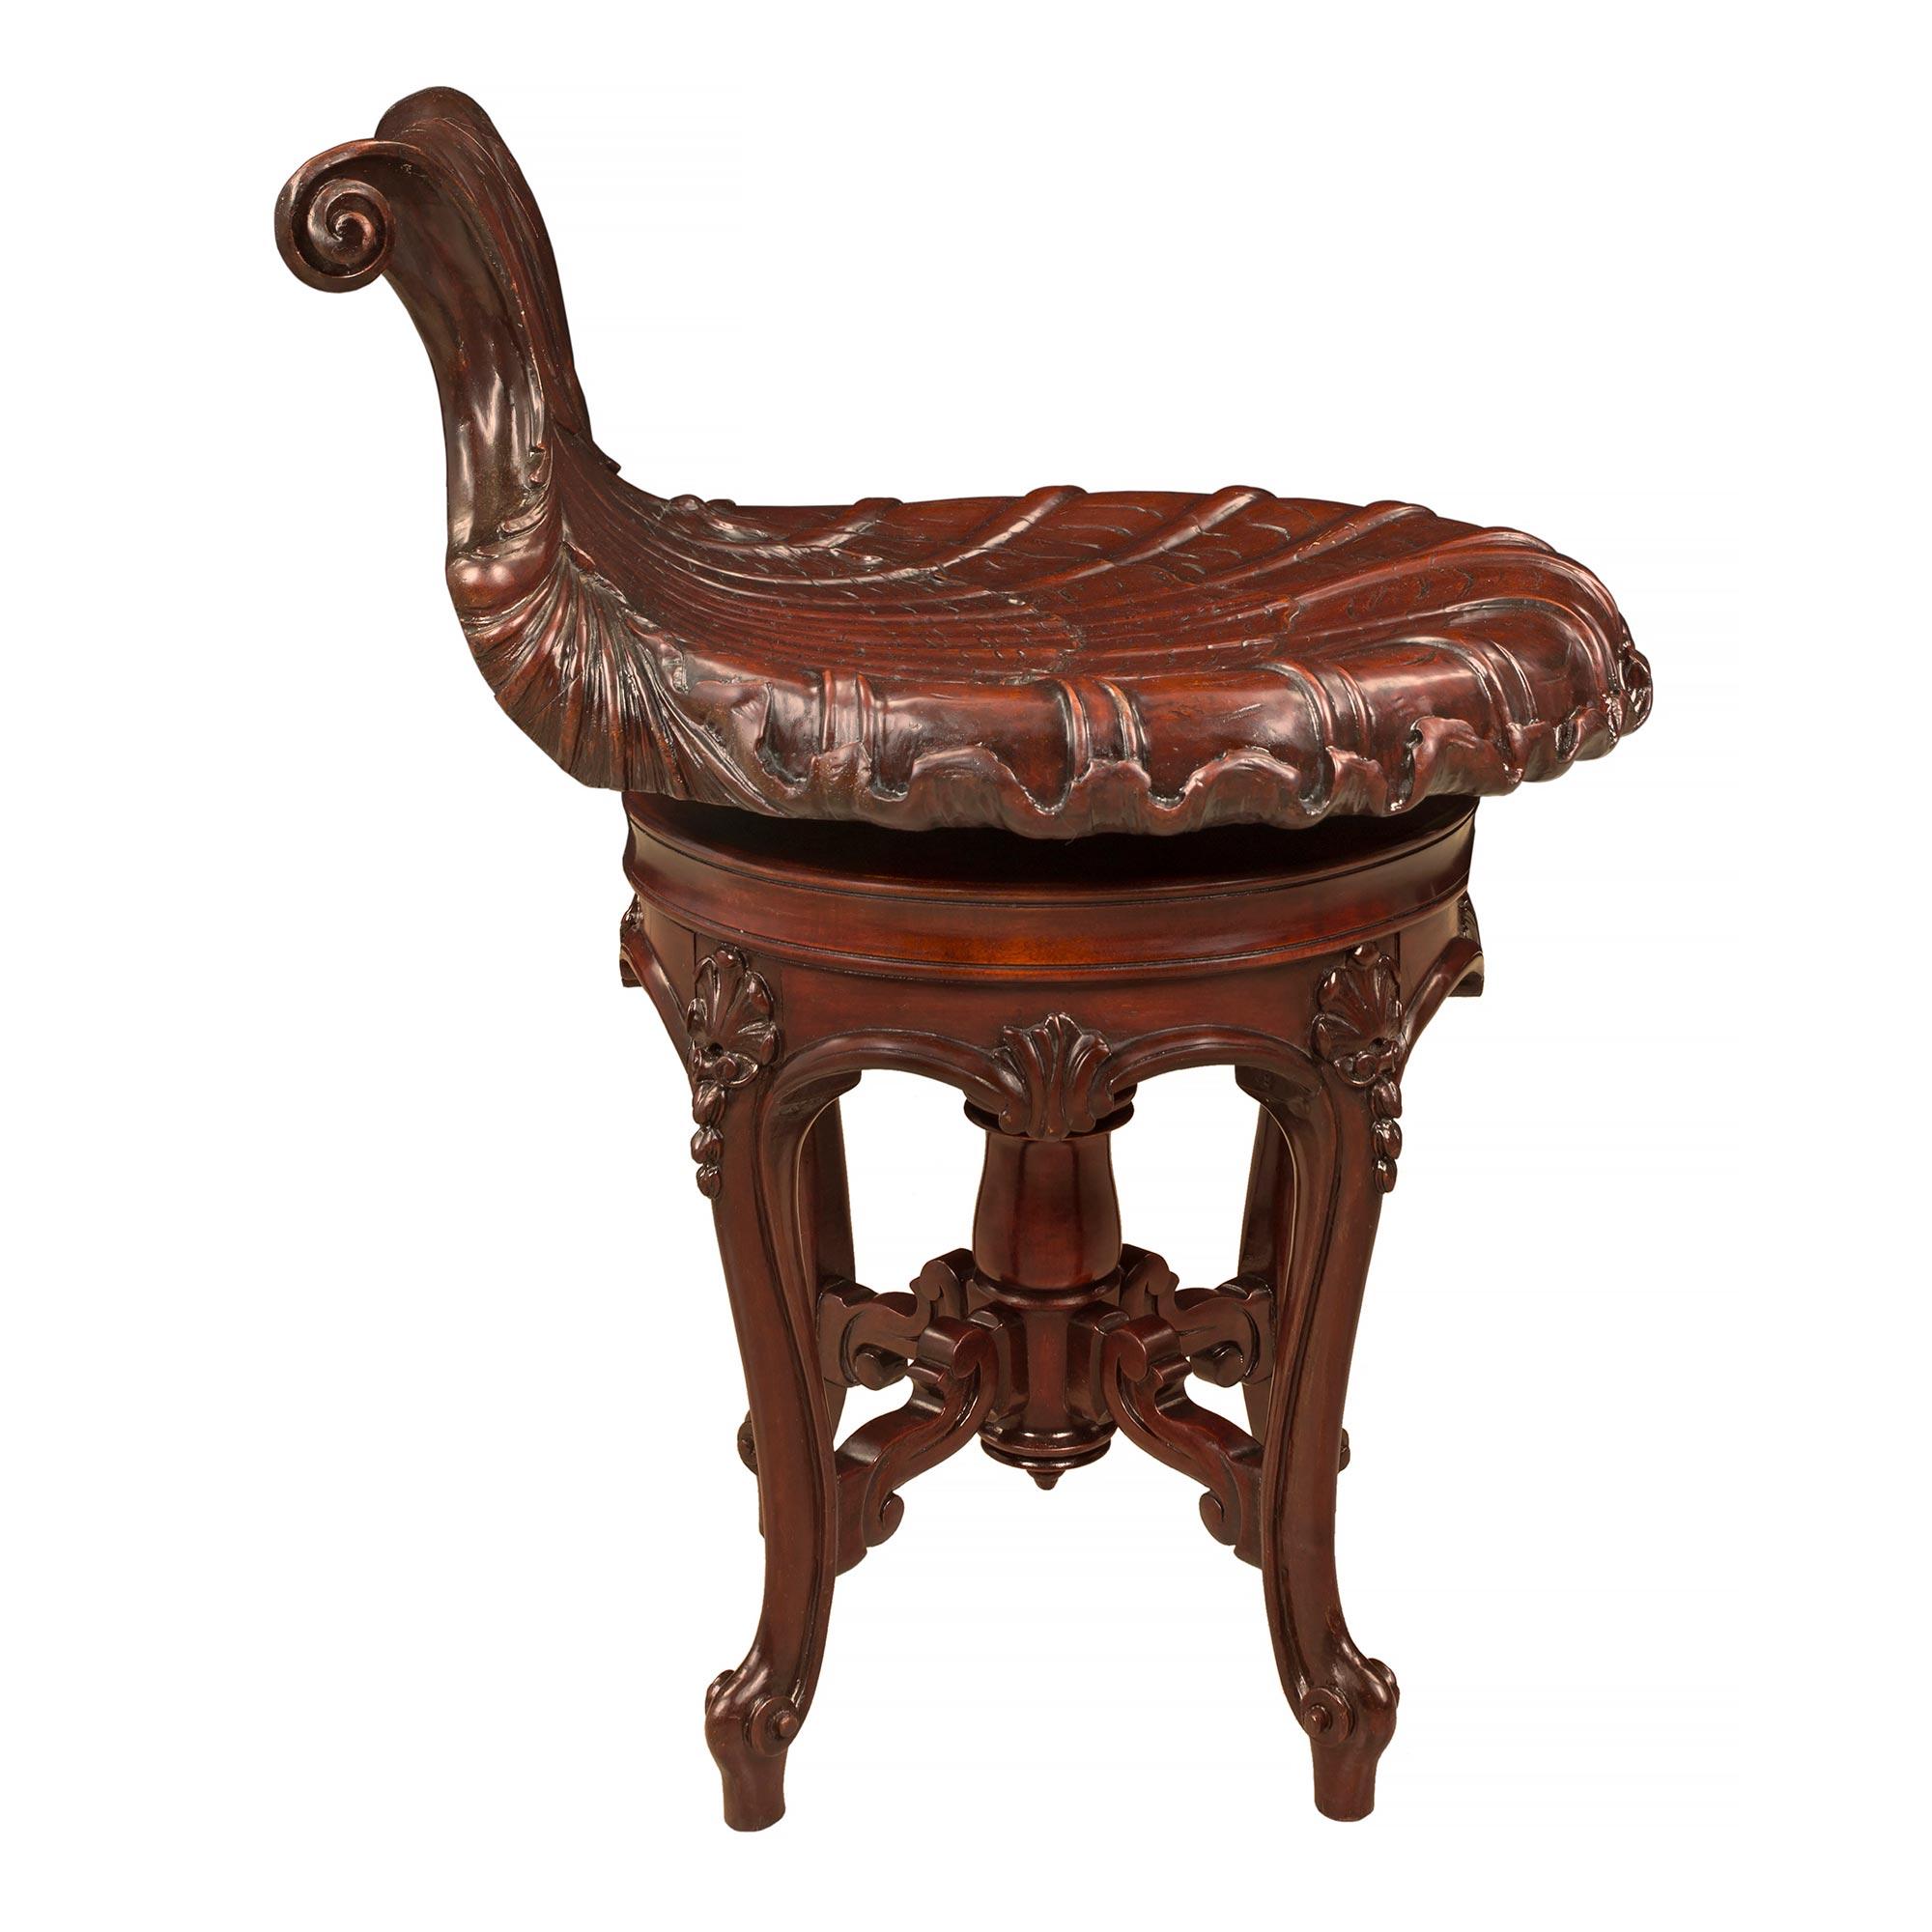 French 19th Century Louis XV Style Mahogany Adjustable Desk or Vanity Chair For Sale 1